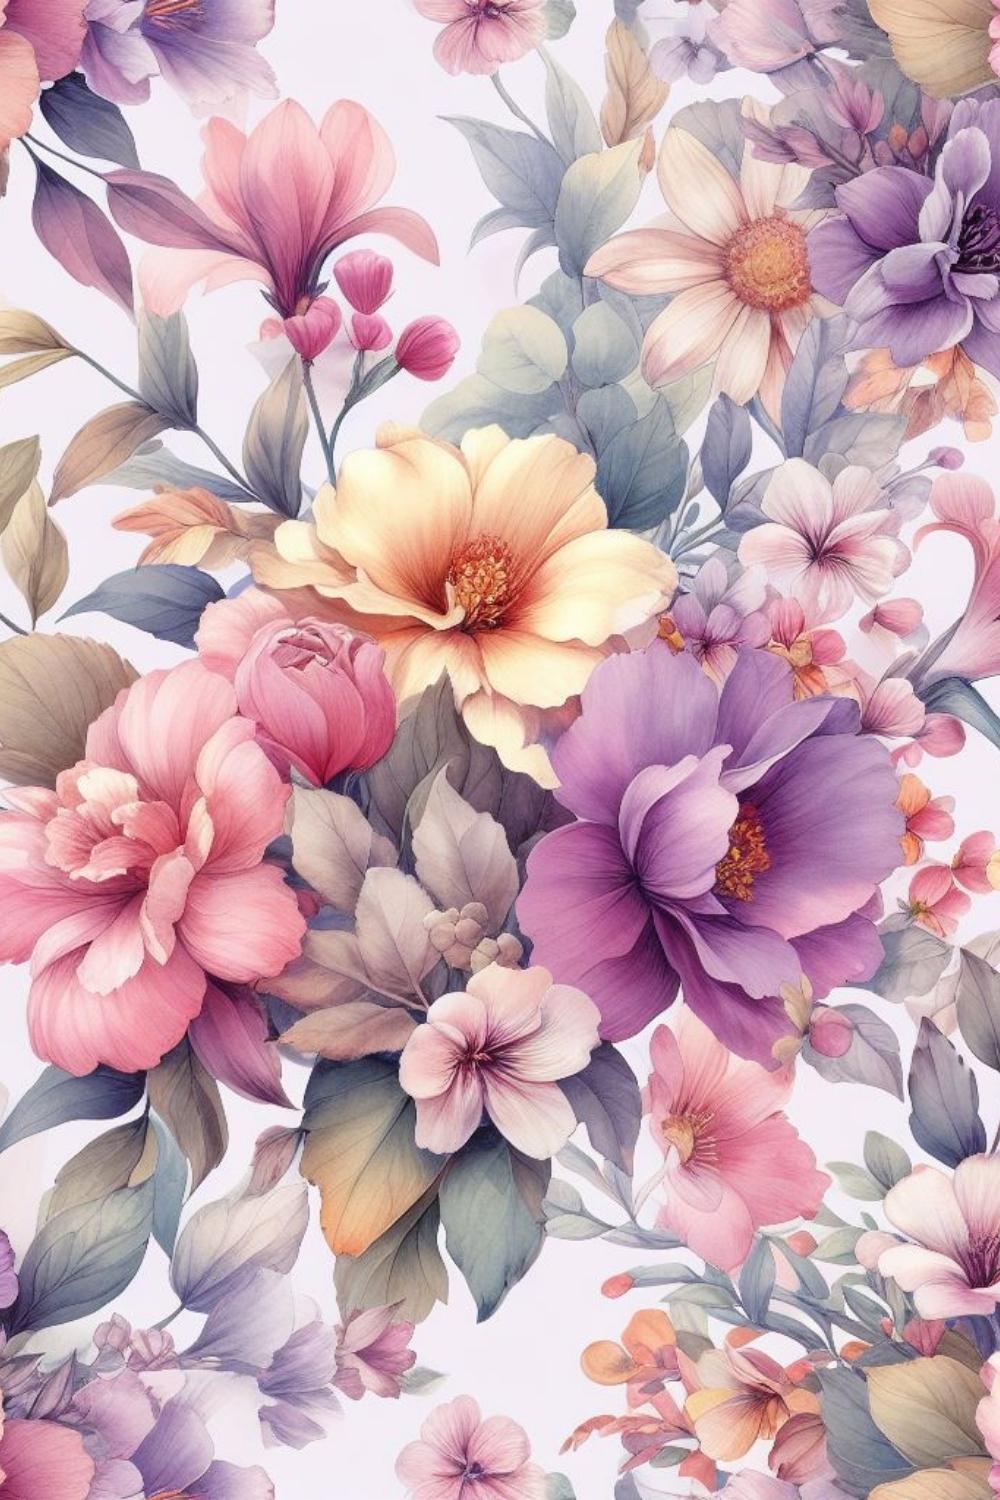 Flower patterns pinterest preview image.